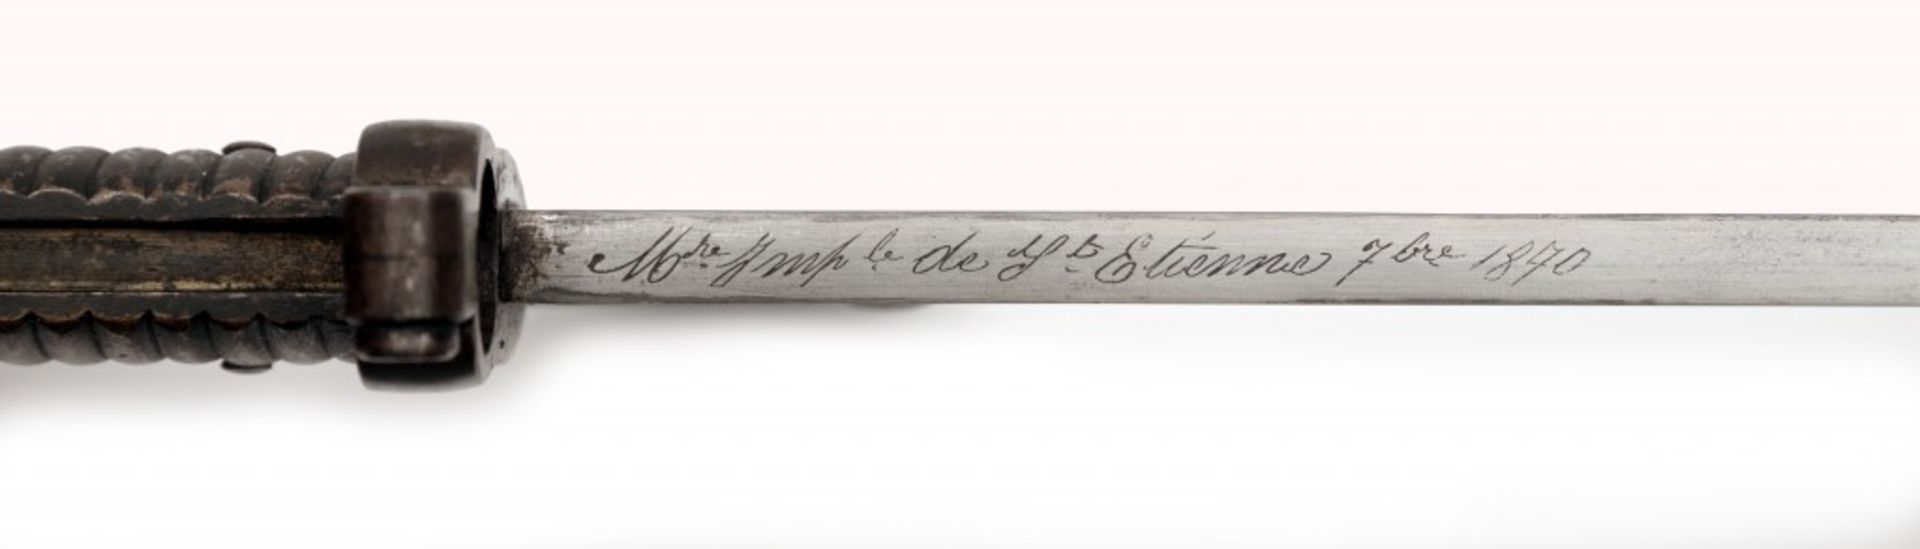 A Sword Bayonet for Chassepot Rifle Model 1866 - Image 4 of 4